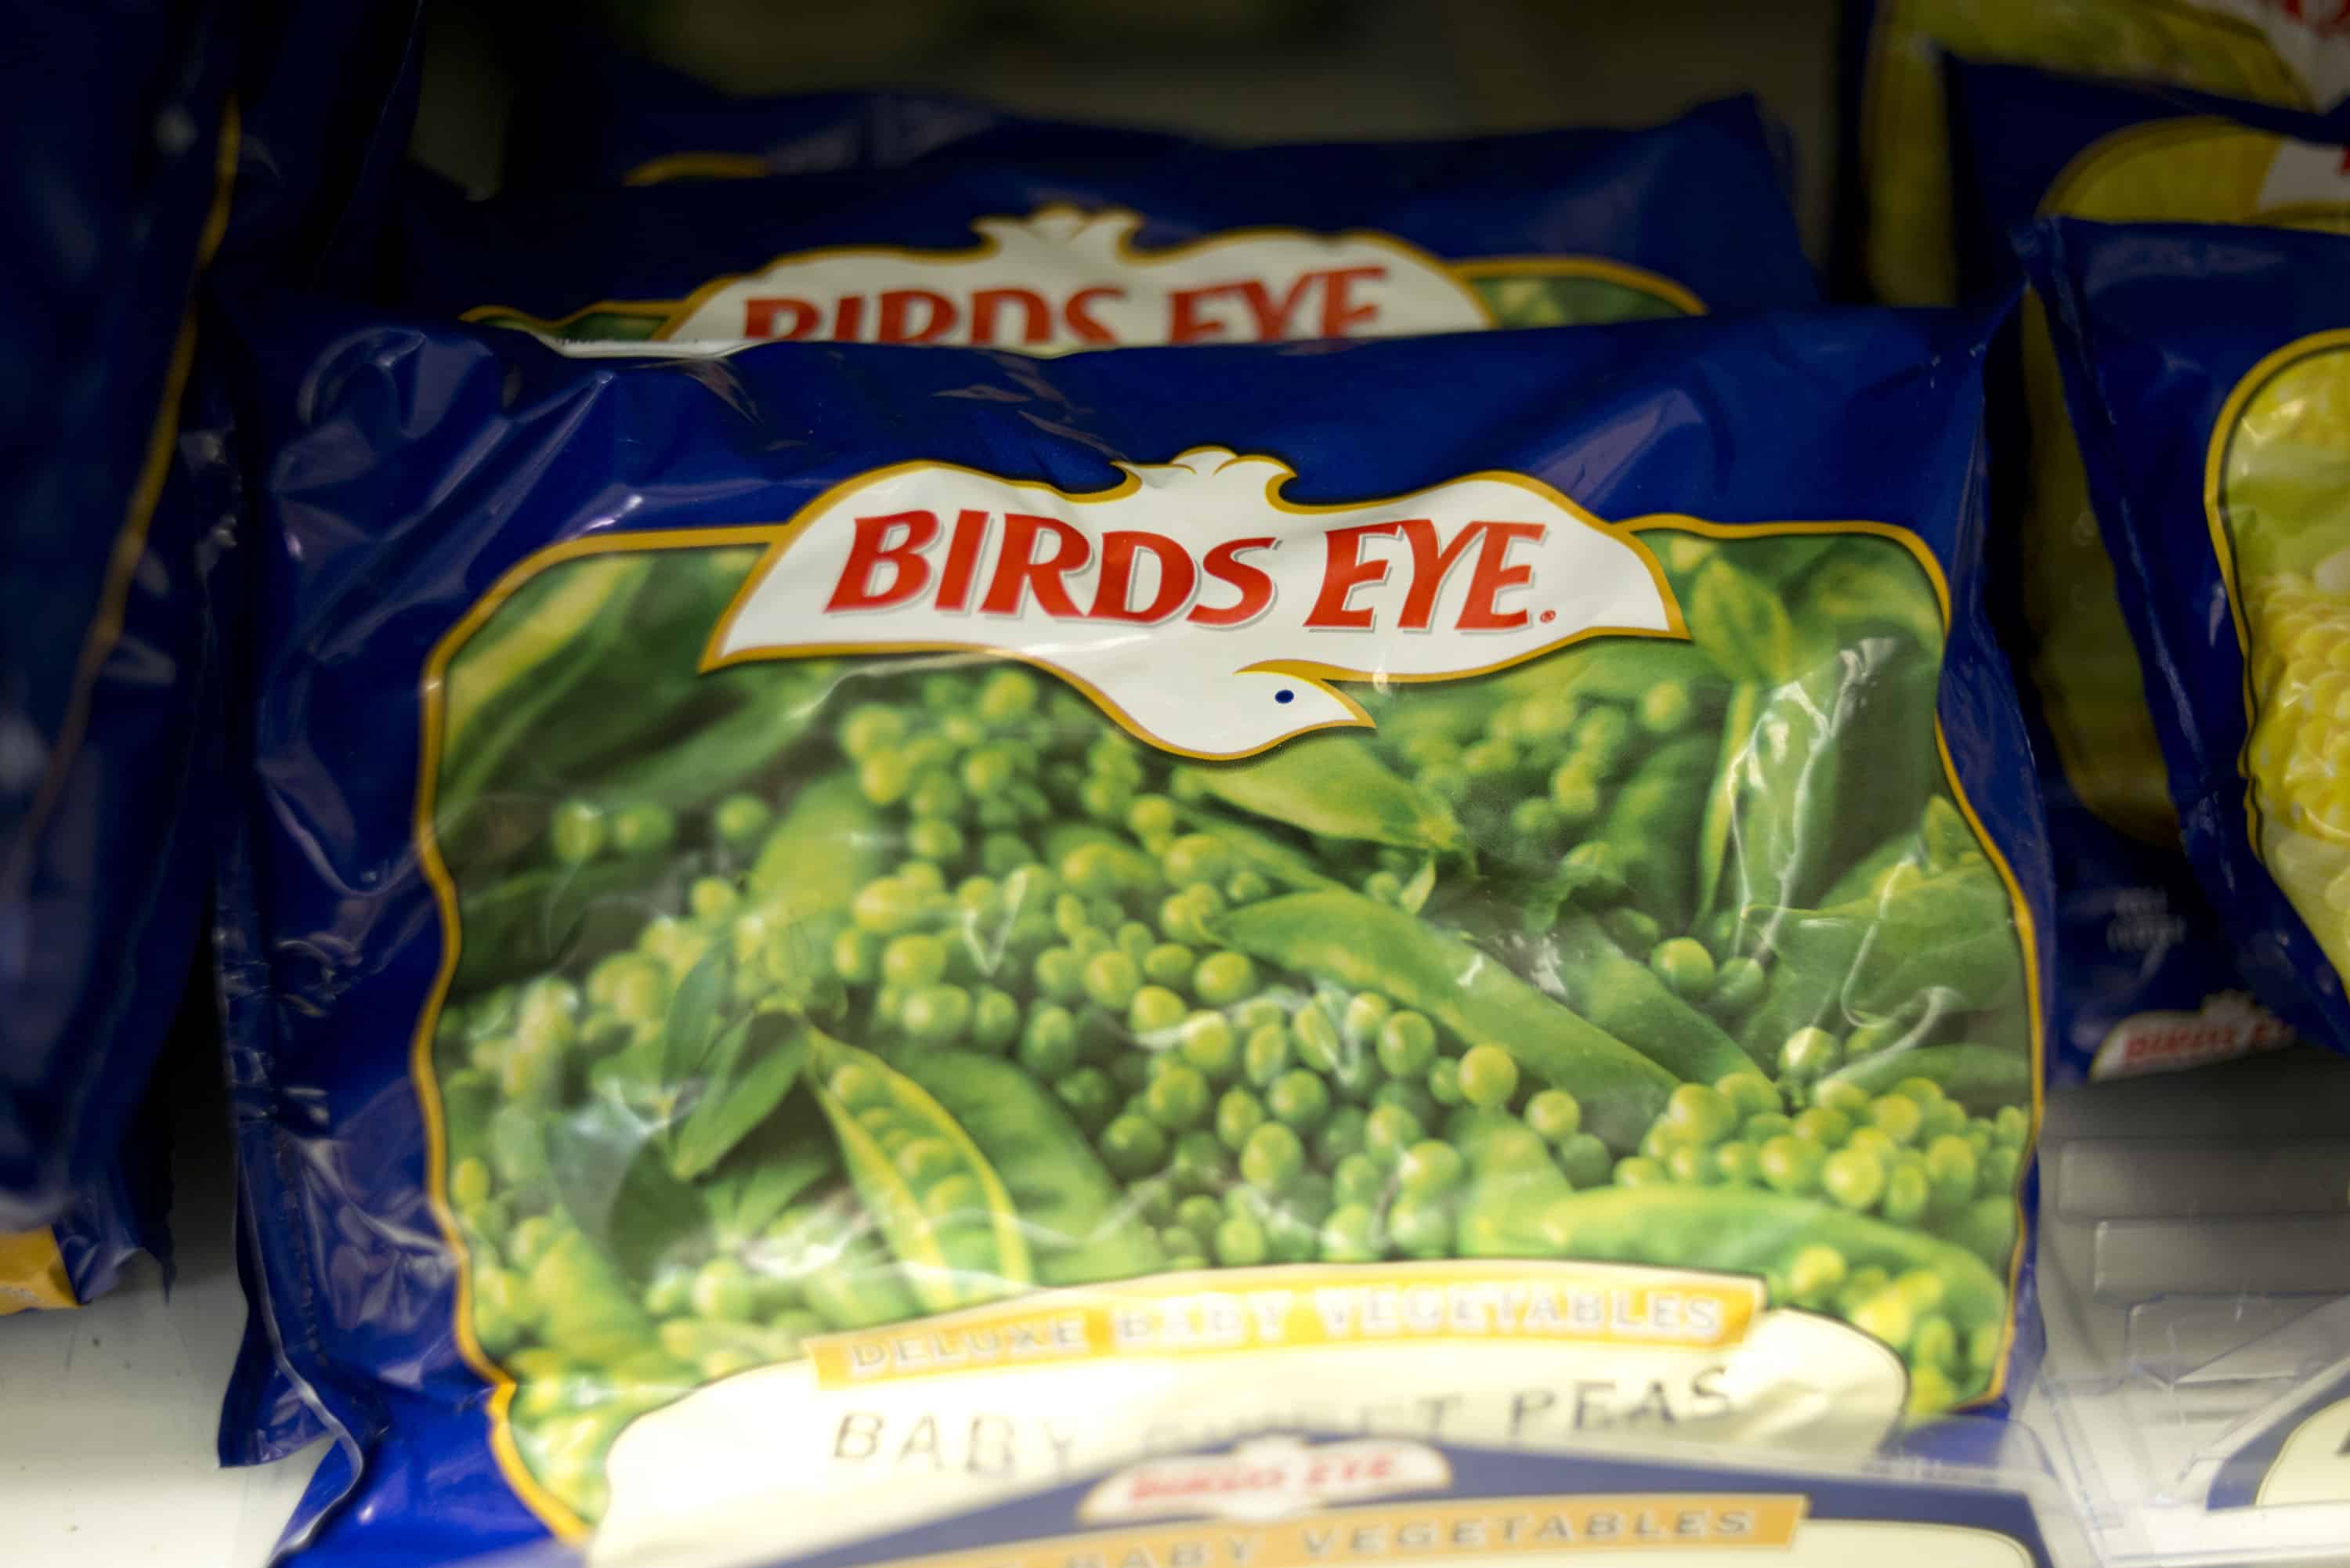 Conagra adds Birds Eye and Hungry Man TV, buys Pinnacle Foods